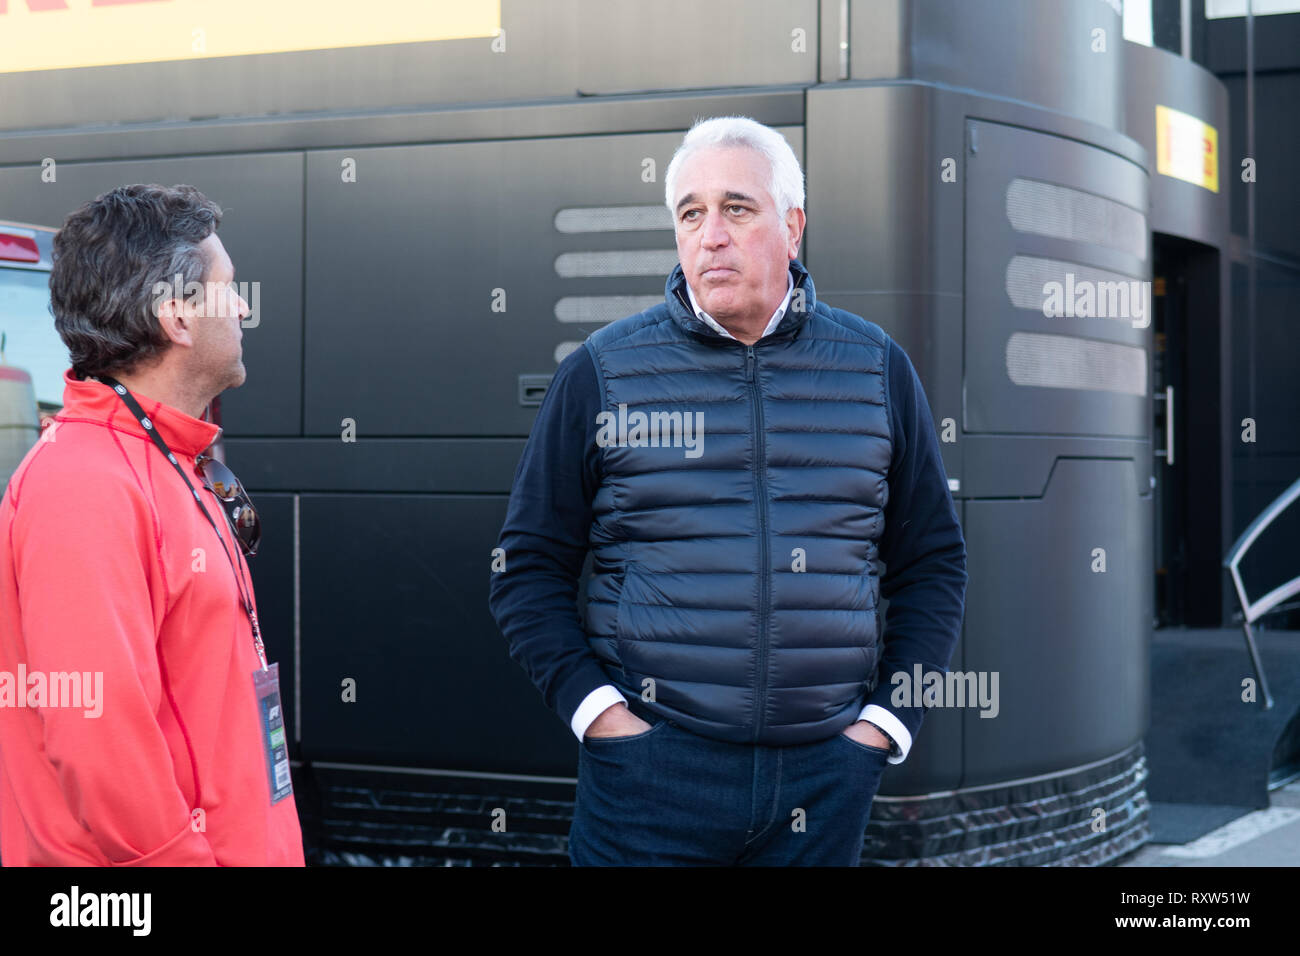 Barcelona, Spain. 18th February, 2019 - Lawrence Stroll father of Lance Stroll of SportPesa Racing Point F1 Team during day one of F1 Winter Testing a Stock Photo